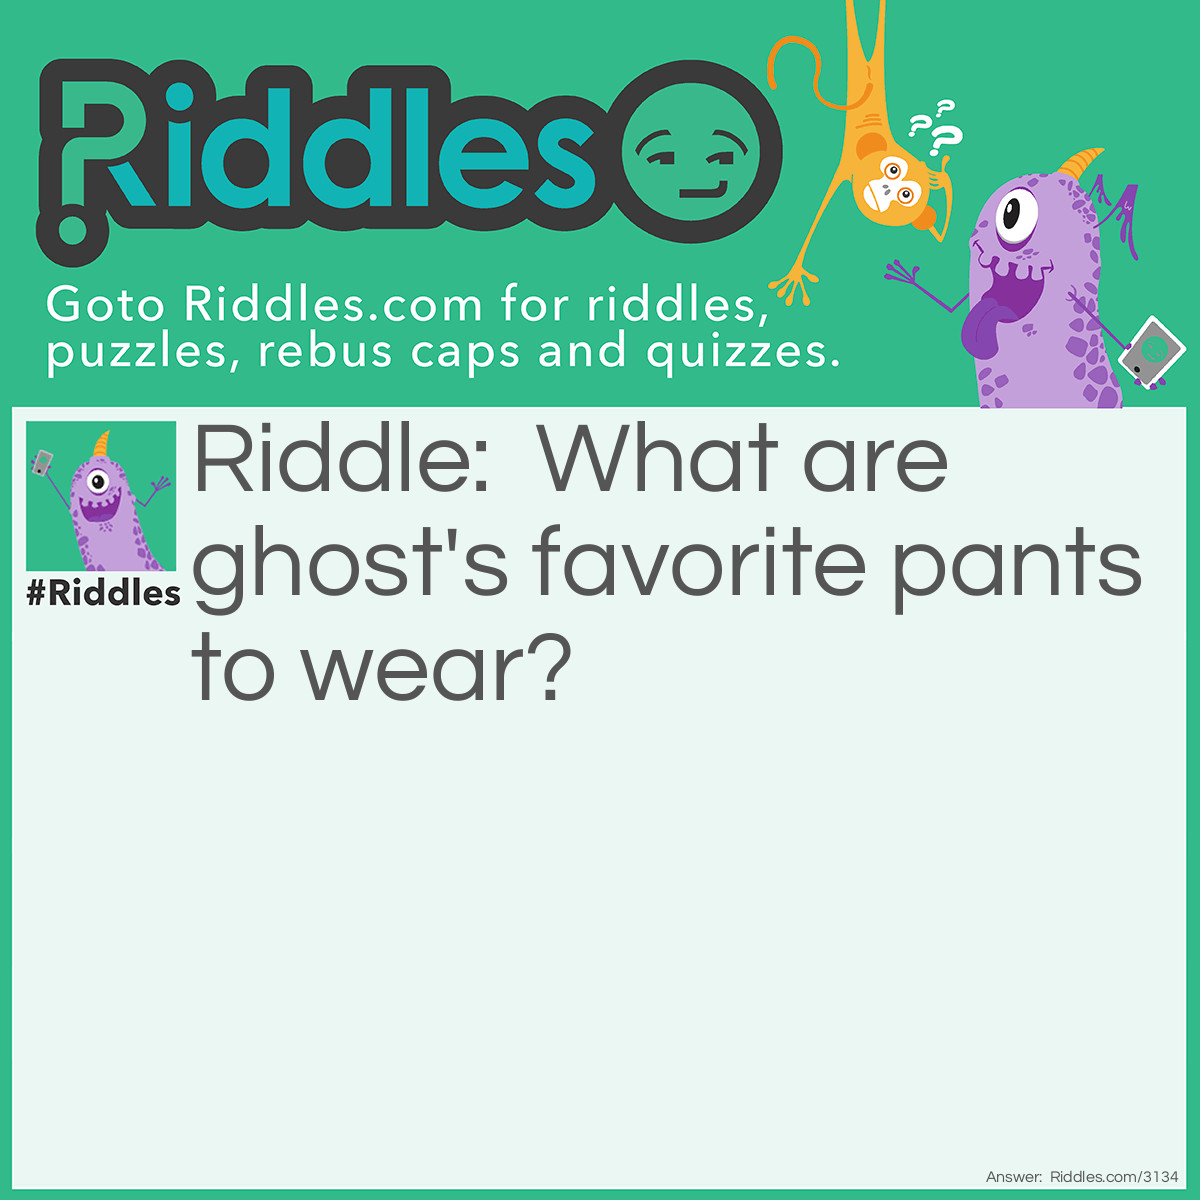 Riddle: What are ghost's favorite pants to wear? Answer: Boo-jeans.